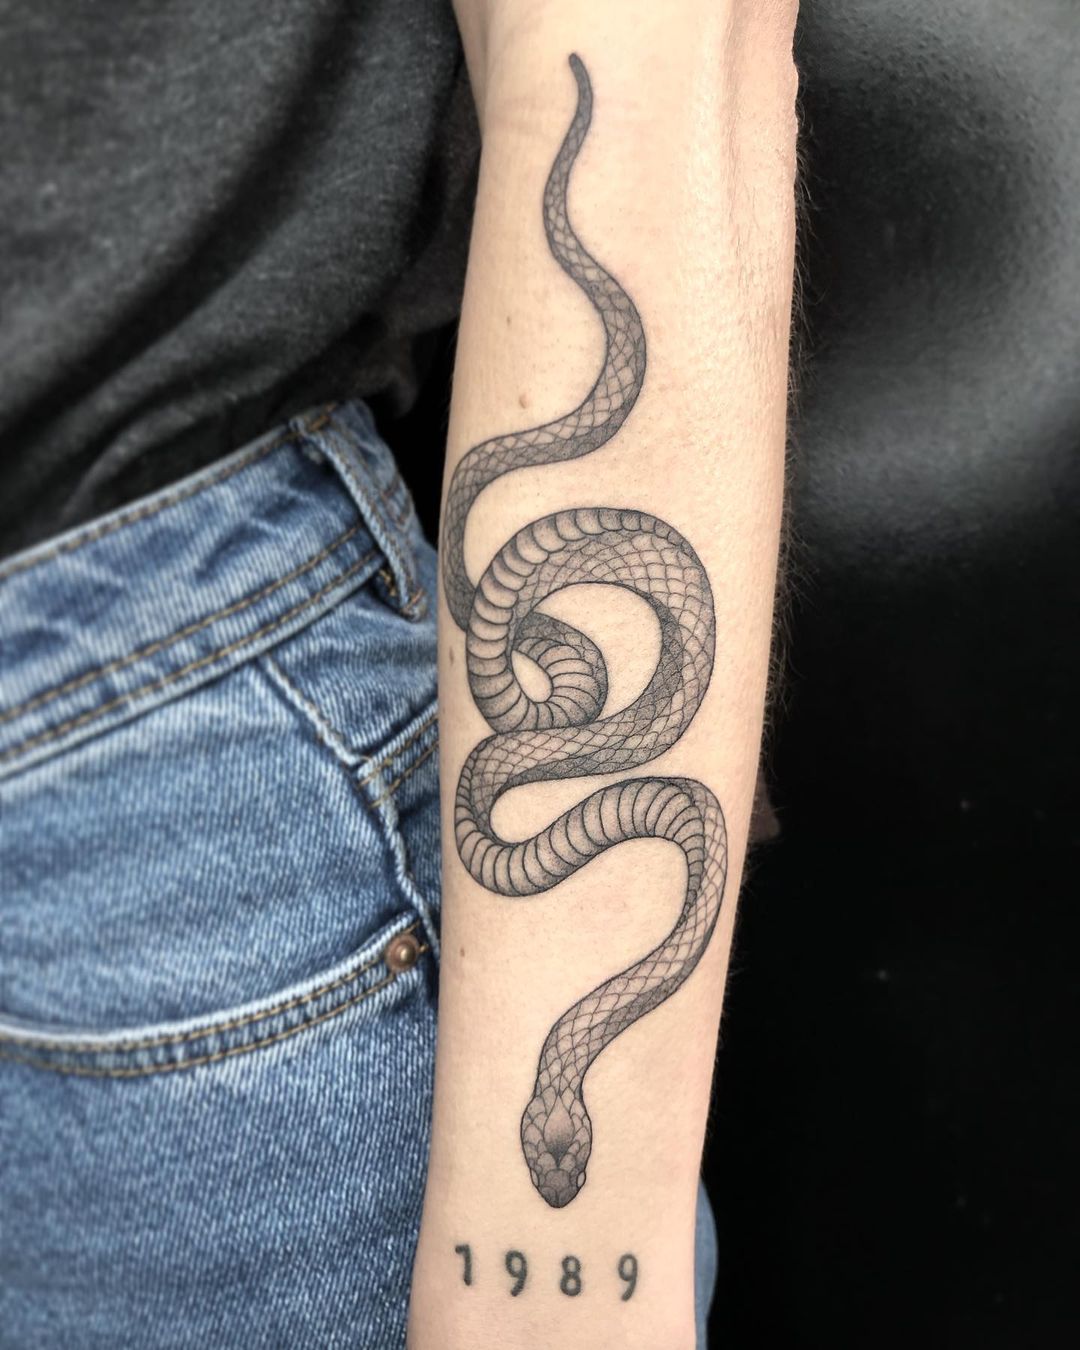 Goth Snake Tattoos Waterproof Lasting Fake Tattoo For Woman Men Ankle Thigh  Arm Tattoo Temporary Tattoos Art Tattoo Sticker  Temporary Tattoos   AliExpress